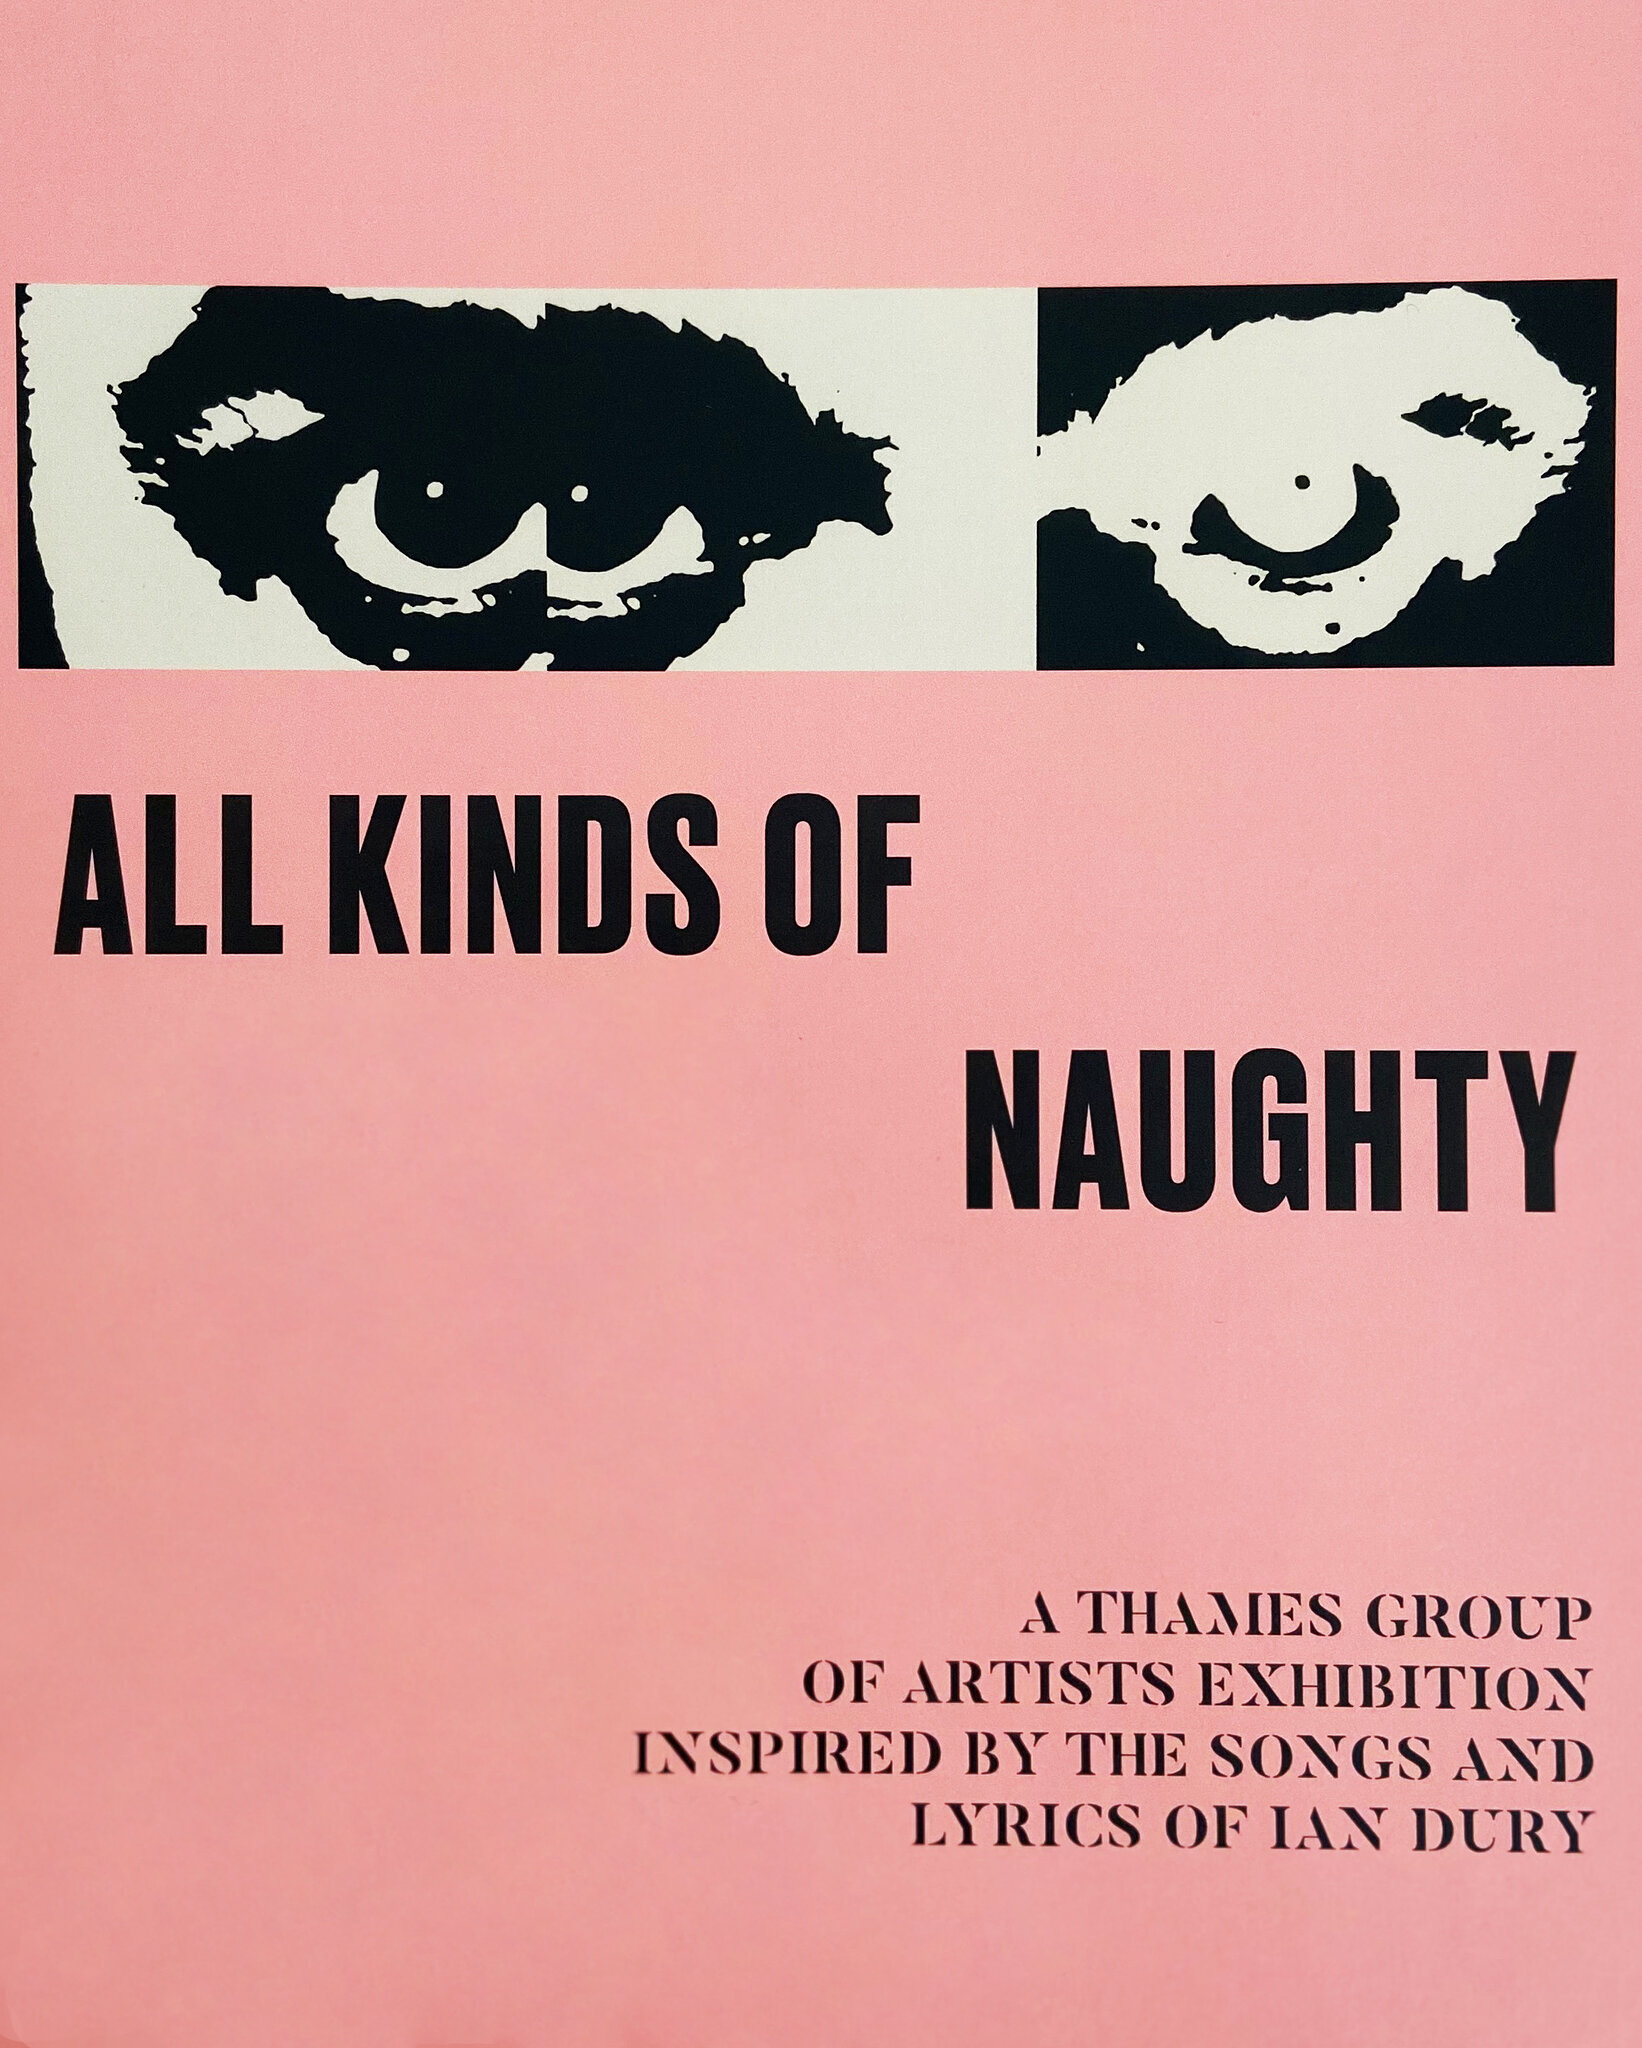 All Kinds Of Naughty: Exhibition Dates Update